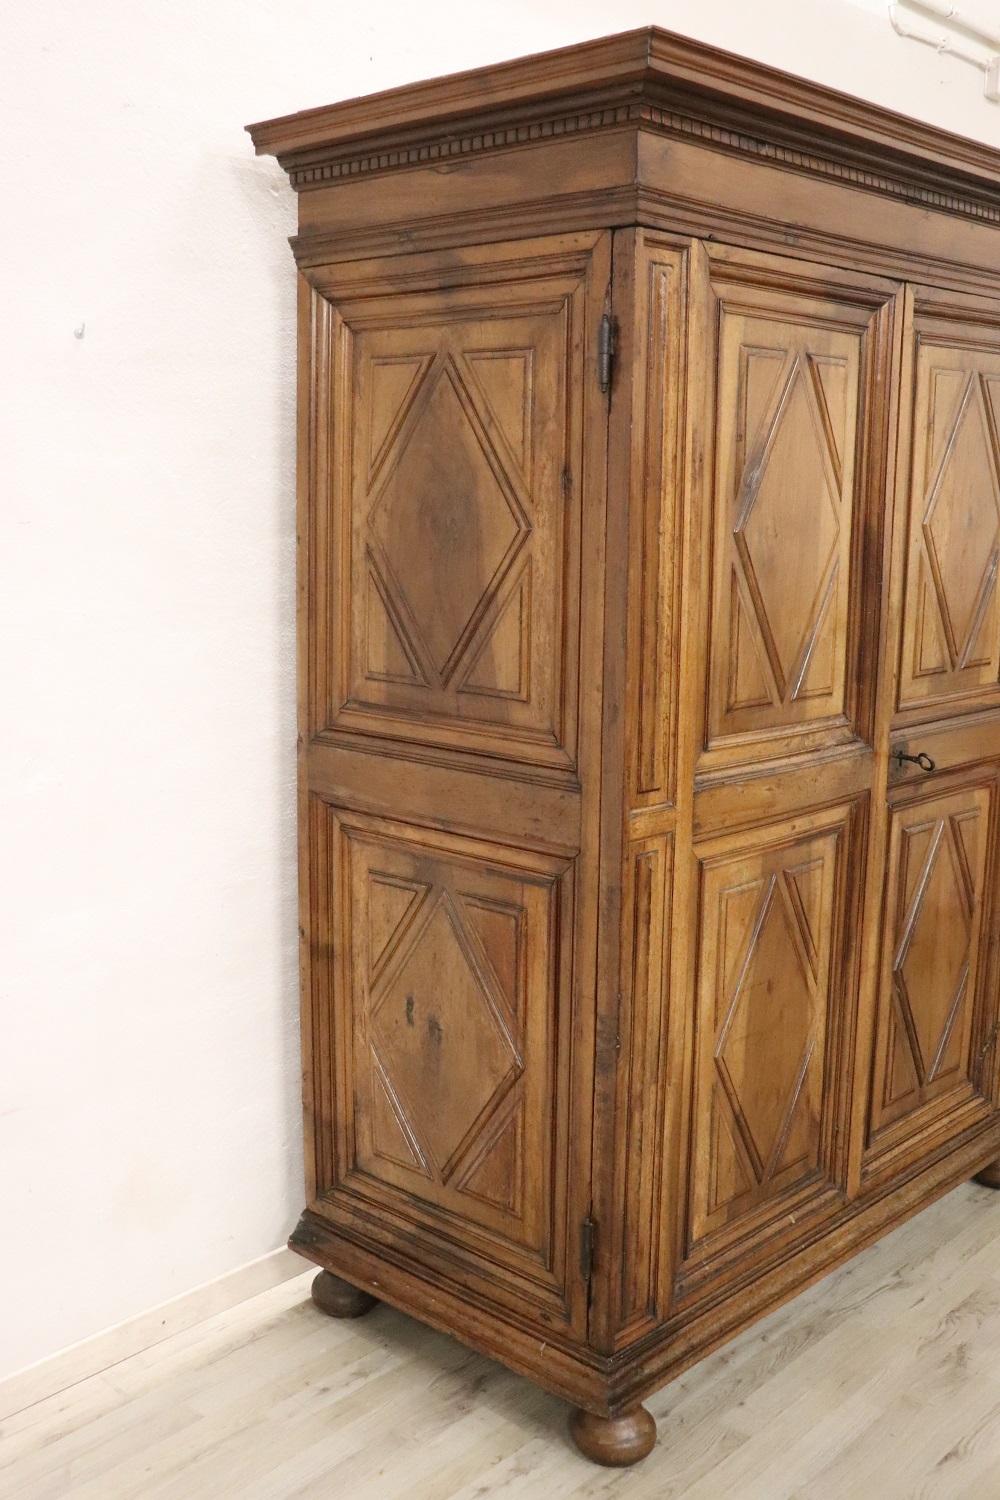 Late 17th Century Louis XIV Solid Walnut Antique Wardrobe or Armoire with Secret For Sale 1